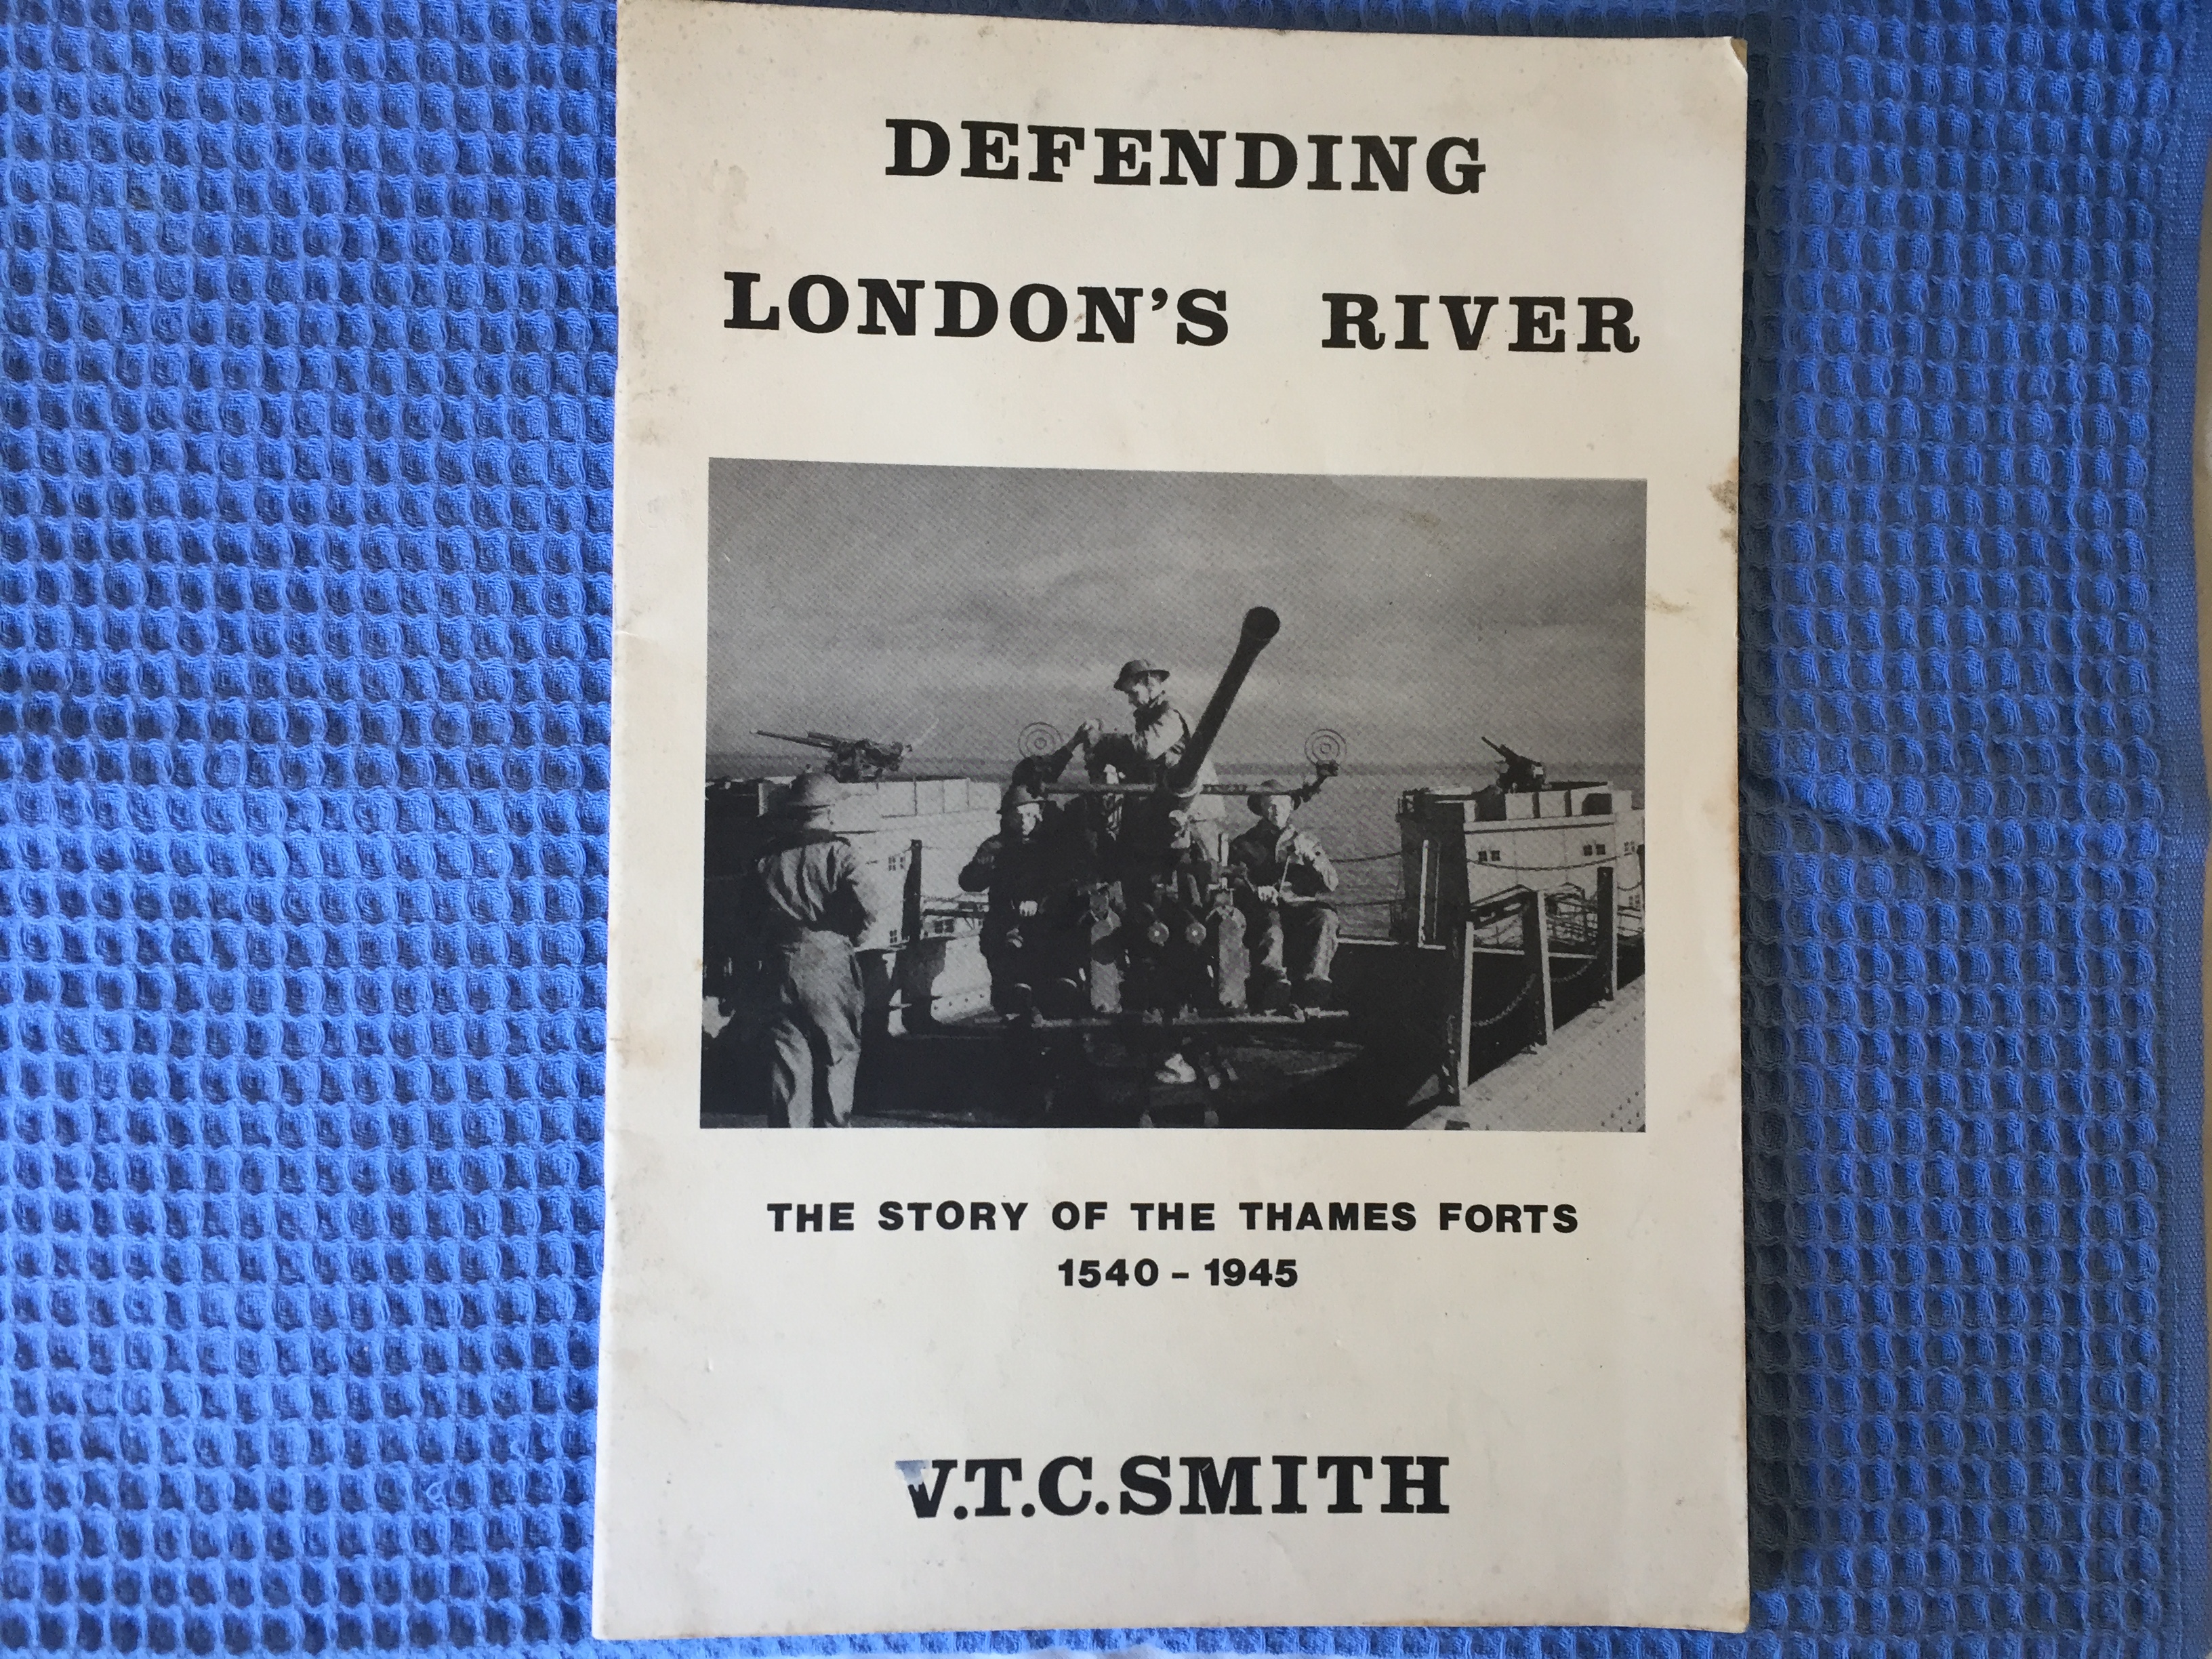 BOOK ENTITLED ‘DEFENDING LONDONS RIVER’ BY V.T.C. SMITH  